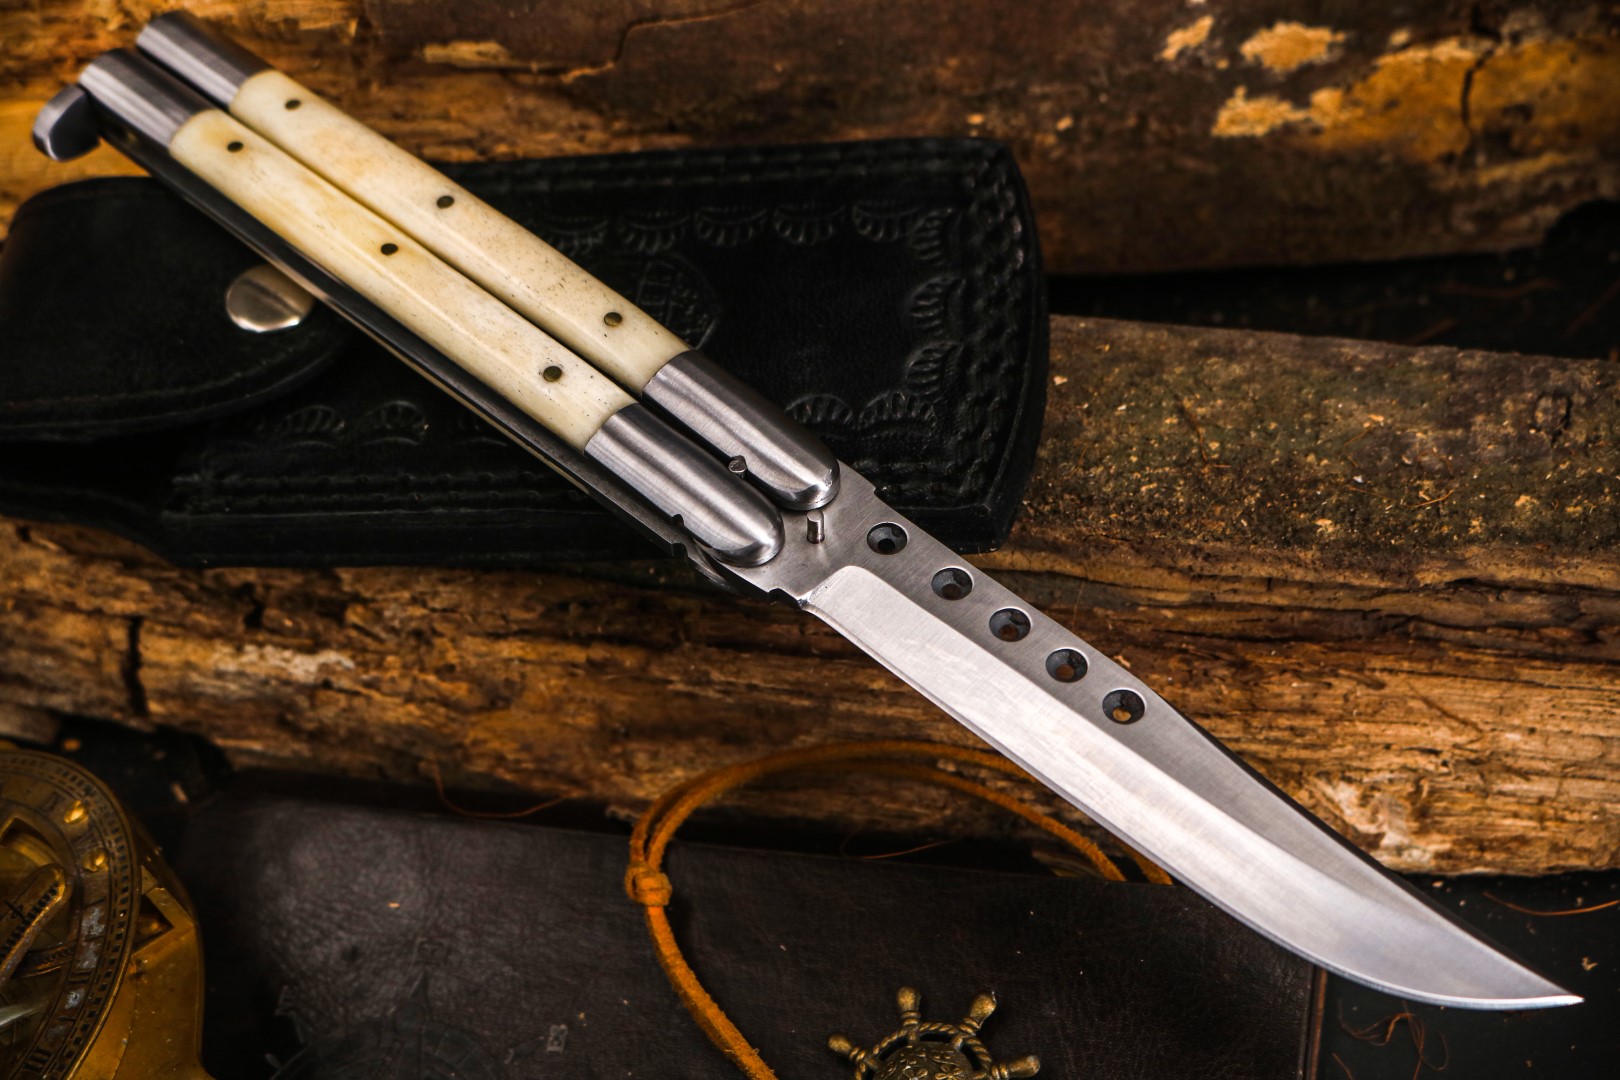 Golden Blade Butterfly Knife - Classic Drop Point Balisong - Gold